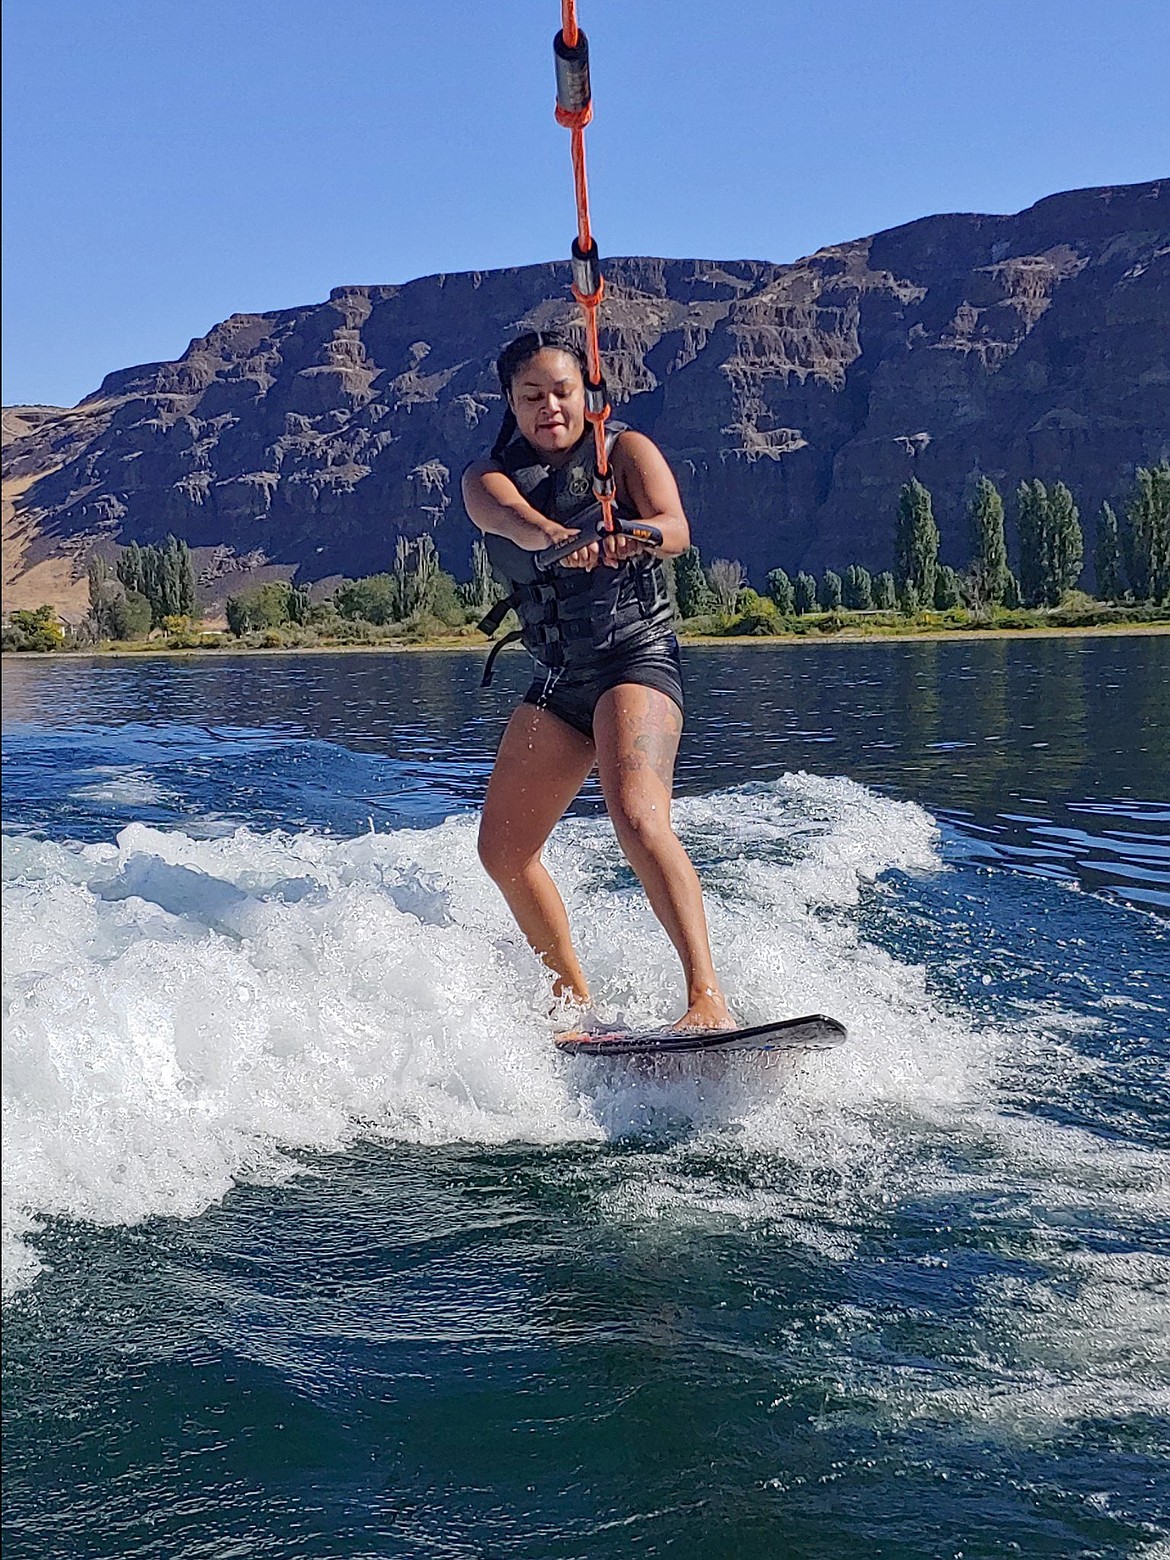 Wake for Warriors’ purpose is to connect military veterans and their families with each other through wakeboarding. The community-supported programs helps veterans interact with others who have shared experiences.